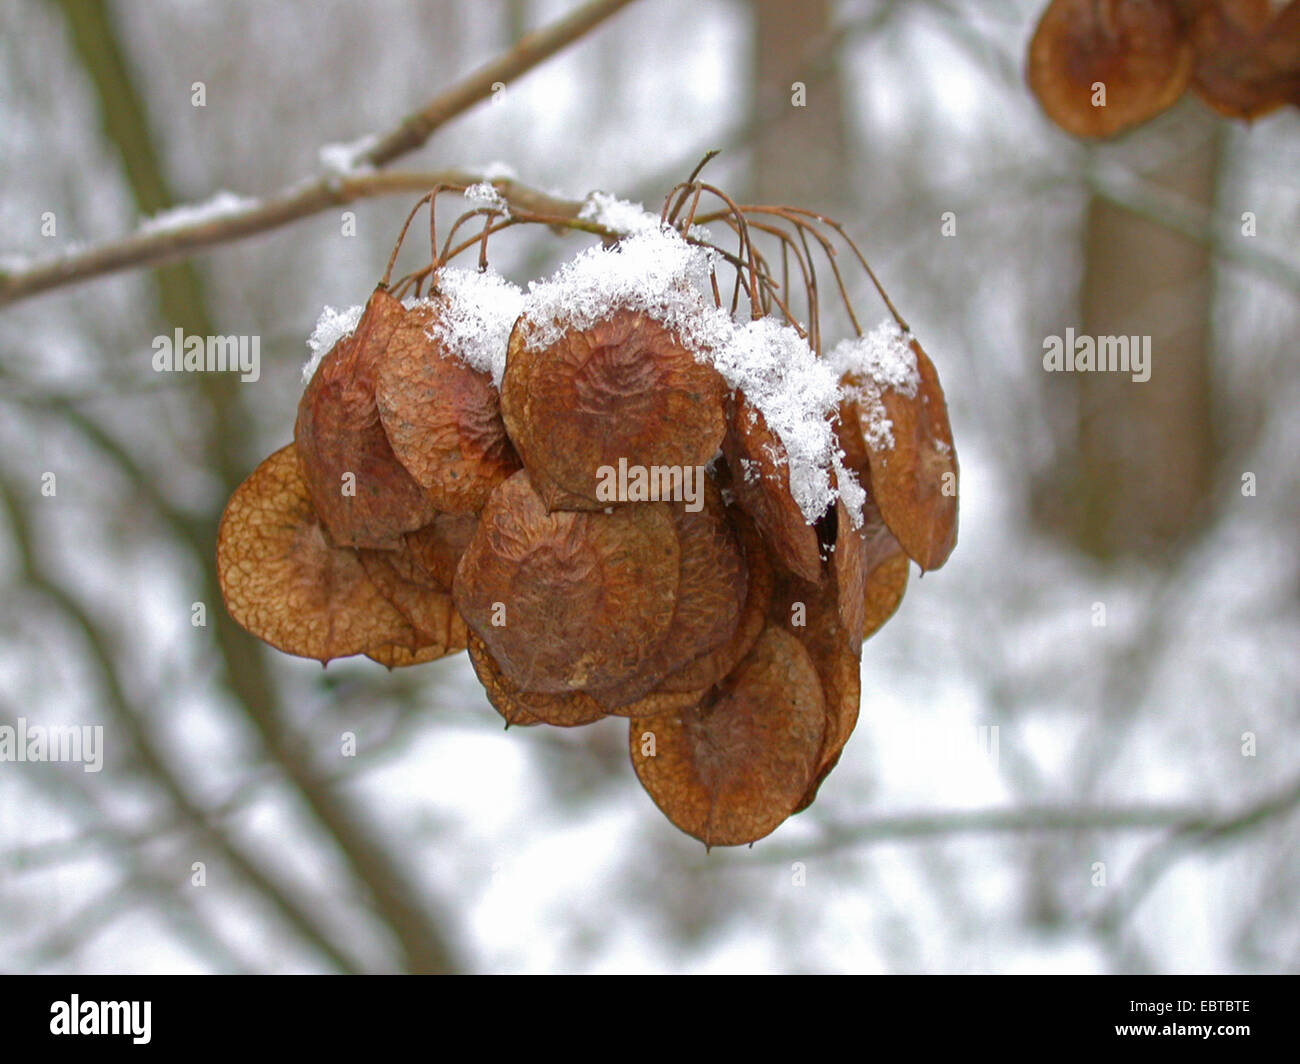 wafer ash, hop tree, stinking ash (Ptelea trifoliata), fruits on a branch in winter Stock Photo